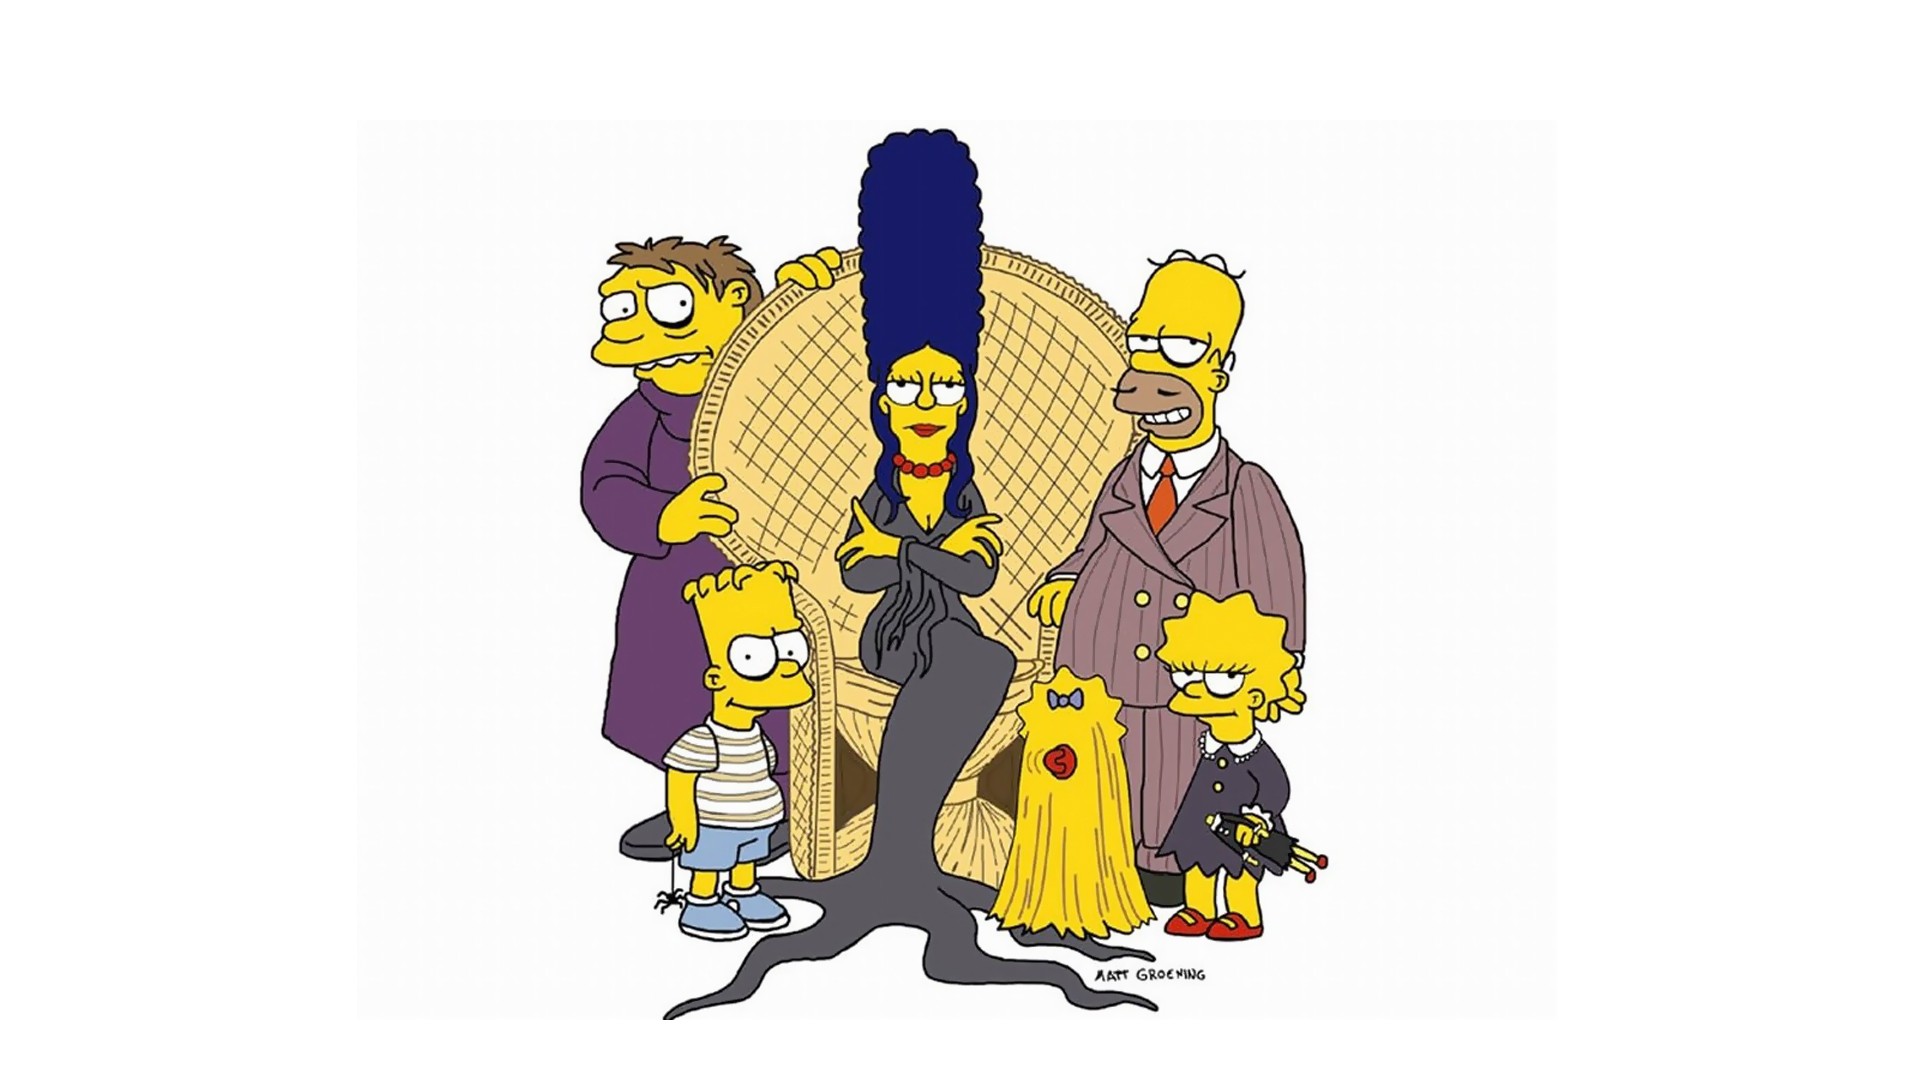 General 1920x1080 The Simpsons Homer Simpson Bart Simpson Marge Simpson Lisa Simpson Maggie Simpson The Addams Family Halloween Wednesday Addams crossover TV series simple background white background